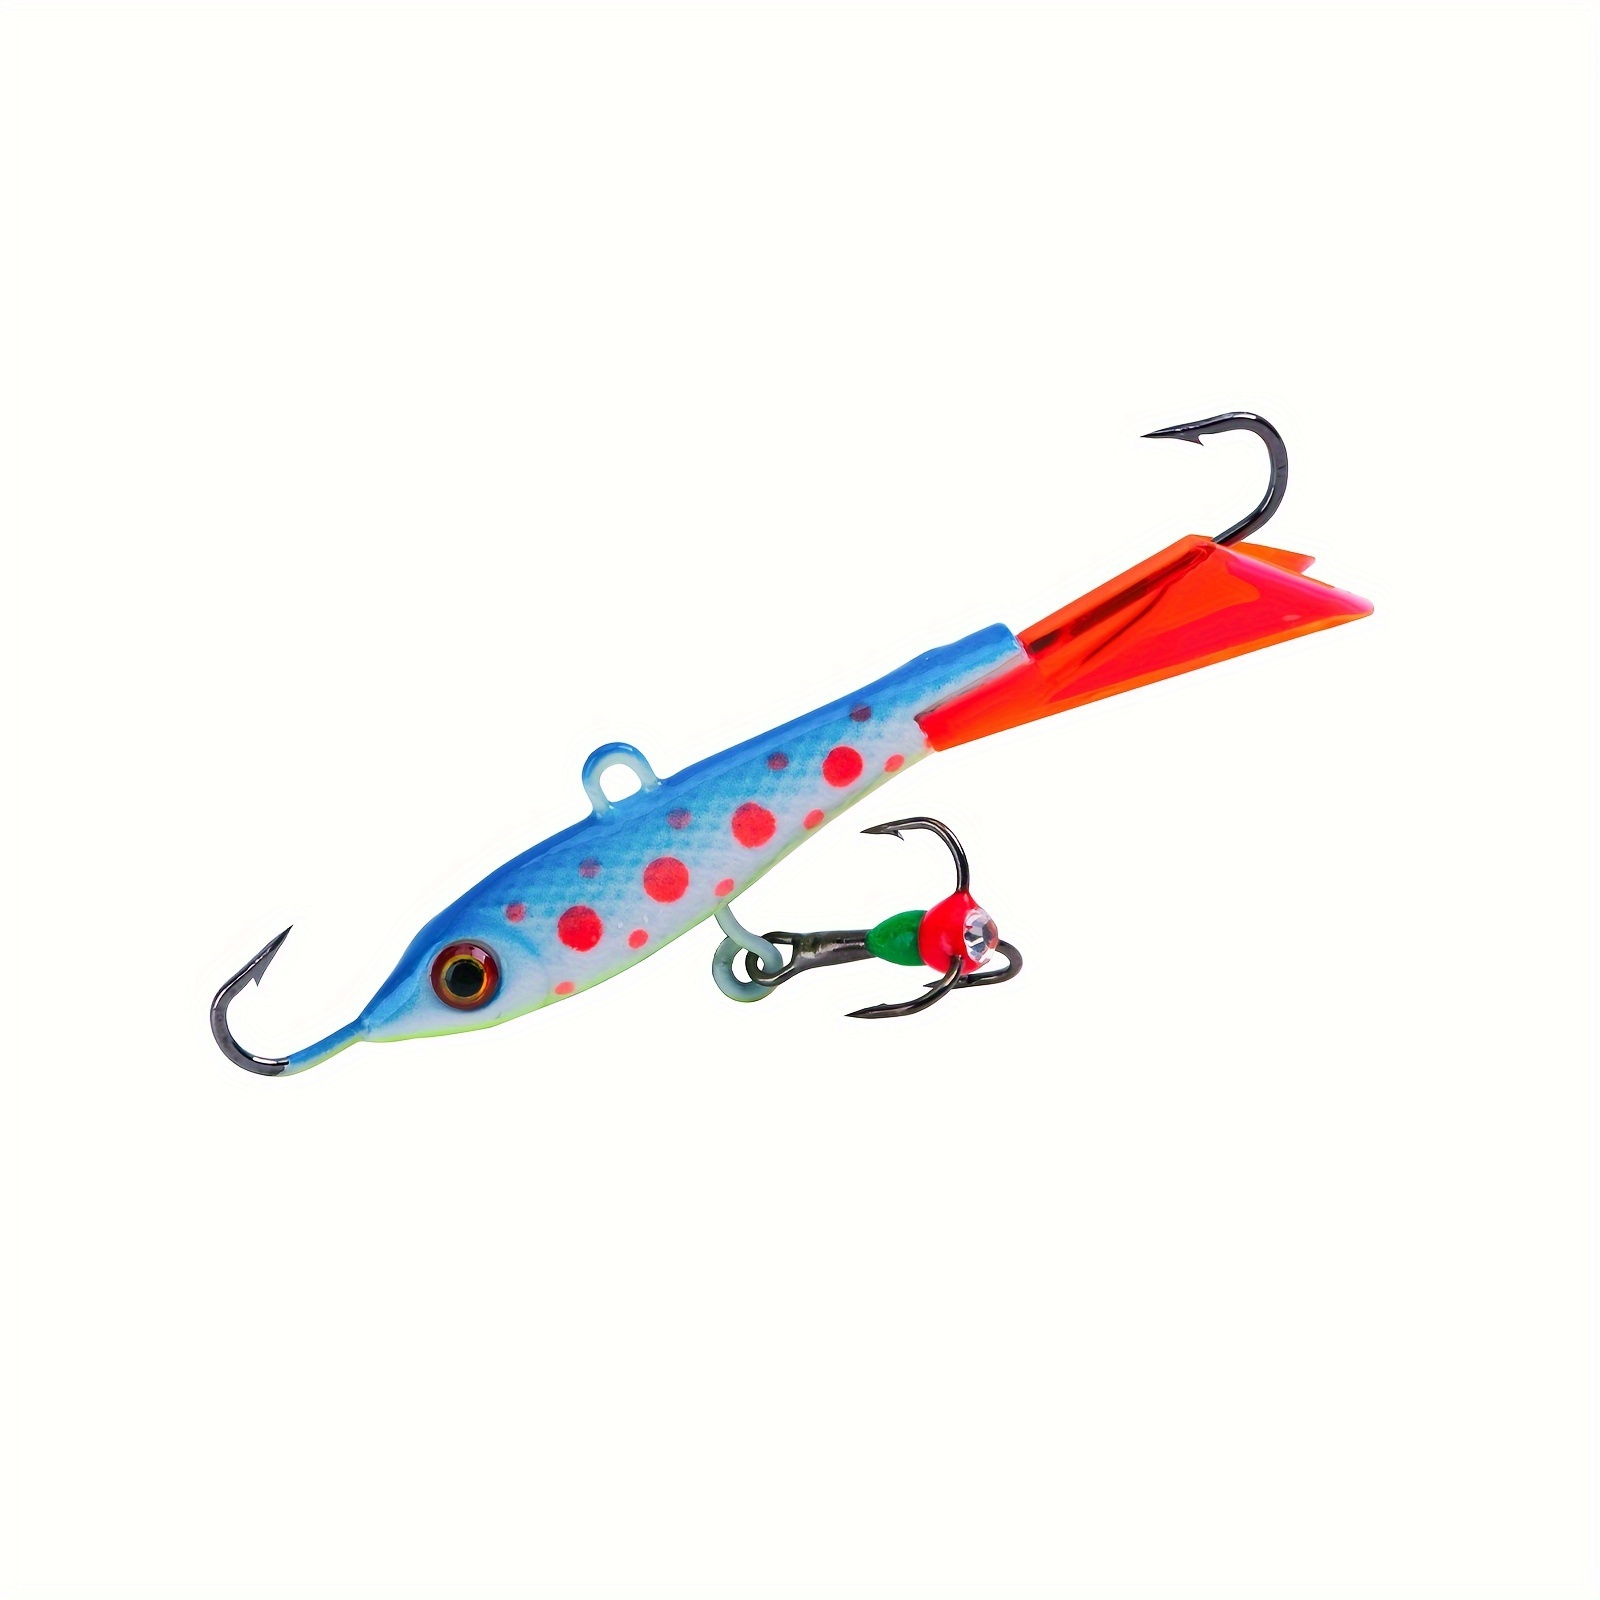  Skipaelf 30Pcs Ice Fishing Lures Kit Glowing Paint Ice Fishing  Jigs,Hard Winter Fishing Ice Jigs Heads Crappie Jigs with Tackle Box Ice  Fishing Gear : Sports & Outdoors